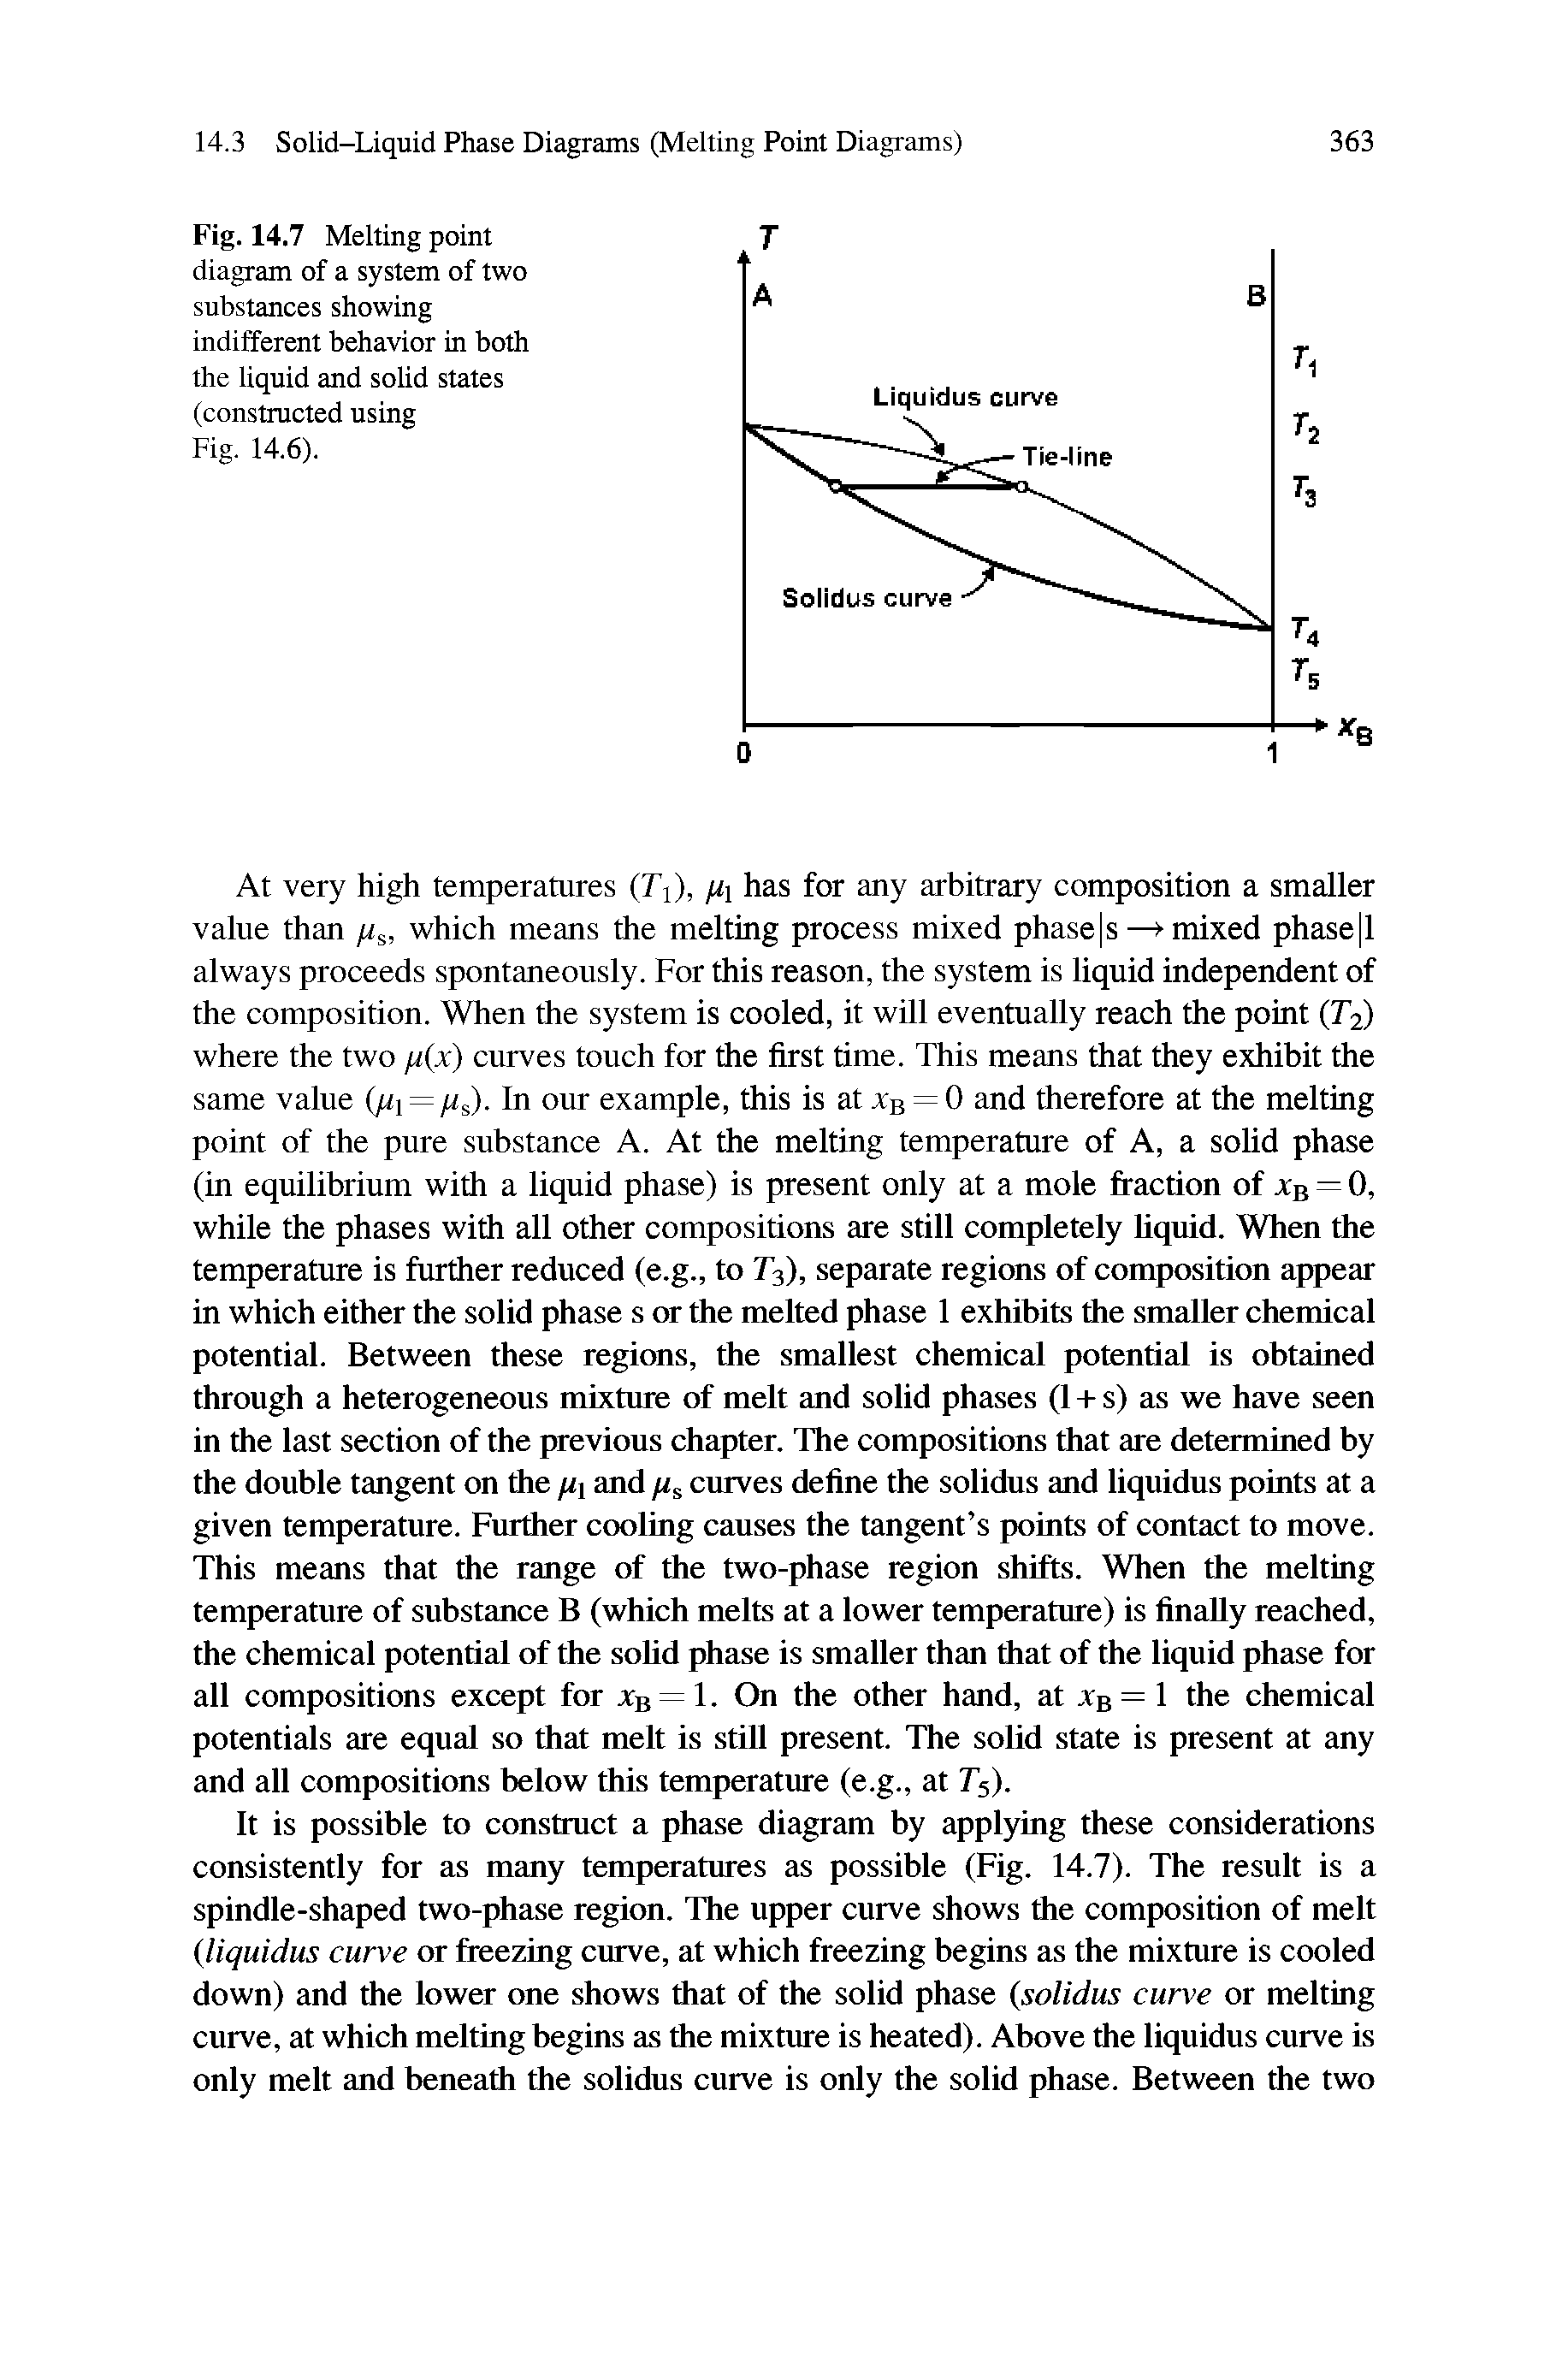 Fig. 14.7 Melting point diagram of a system of two substances showing indifferent behavior in both the liquid and solid states (constructed using Fig. 14.6).